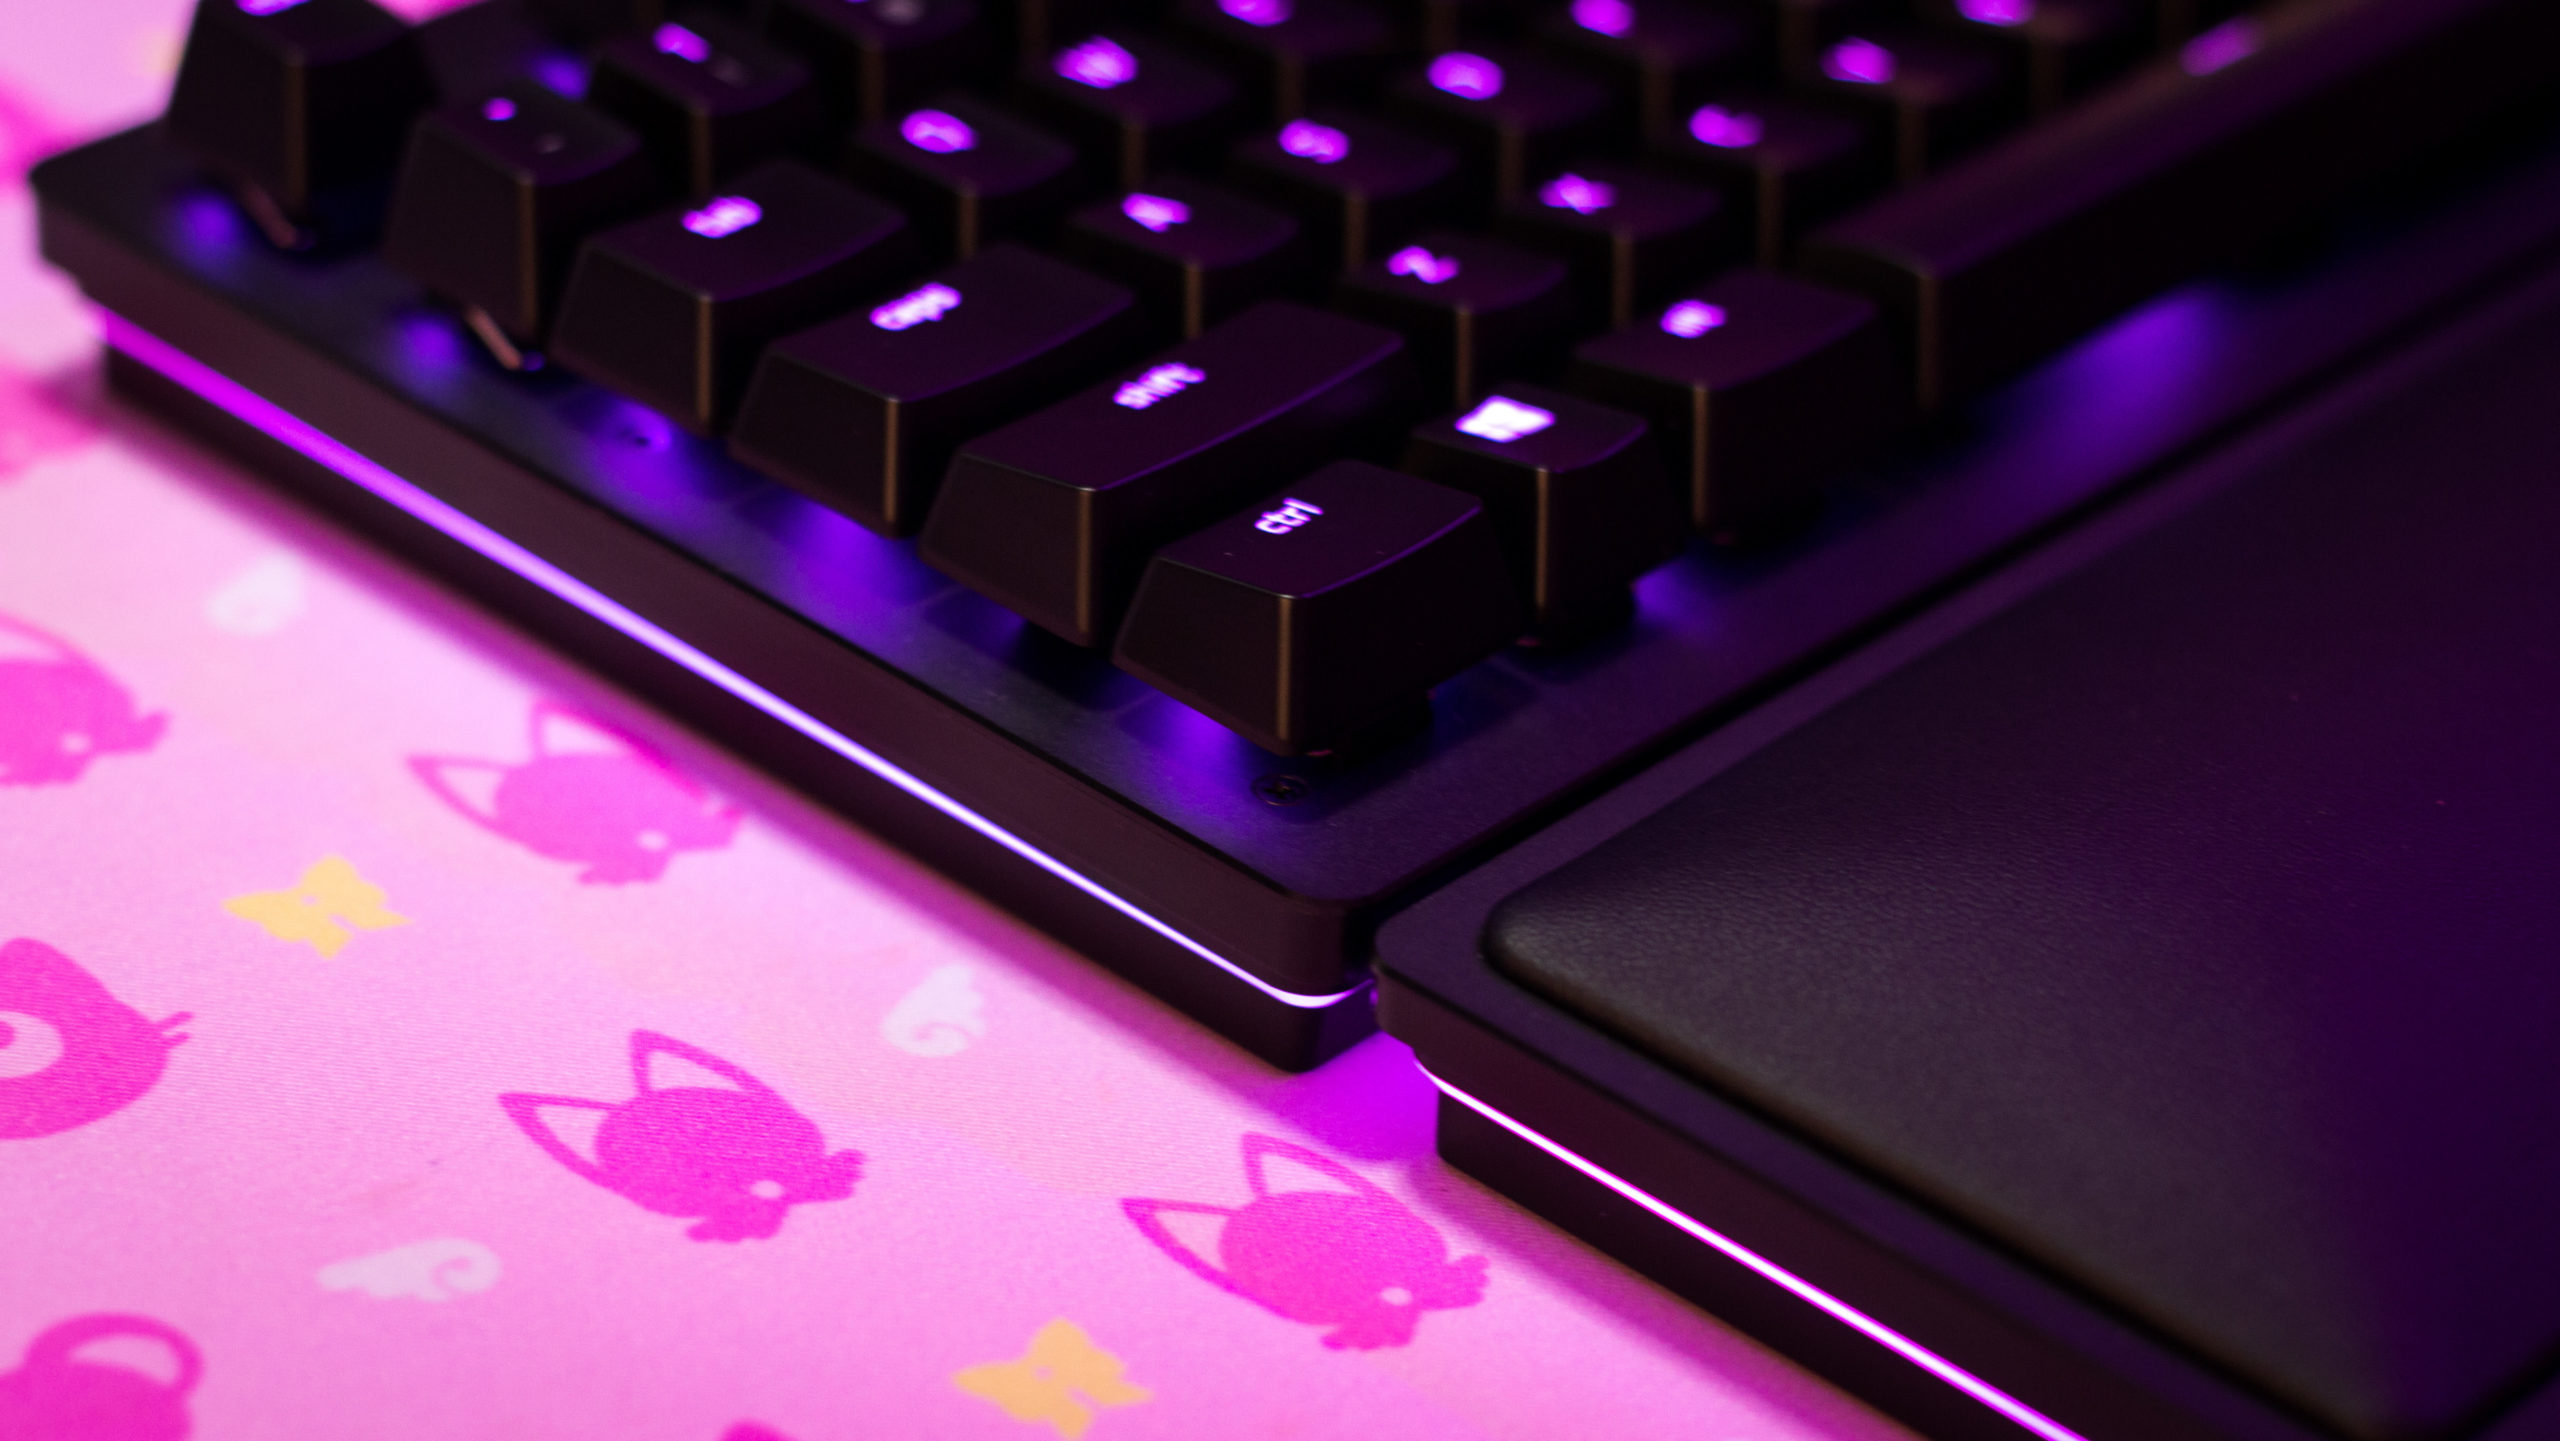 You know you're feeling the lighting in the wrist rest. (Photo: Florence Ion/Gizmodo)